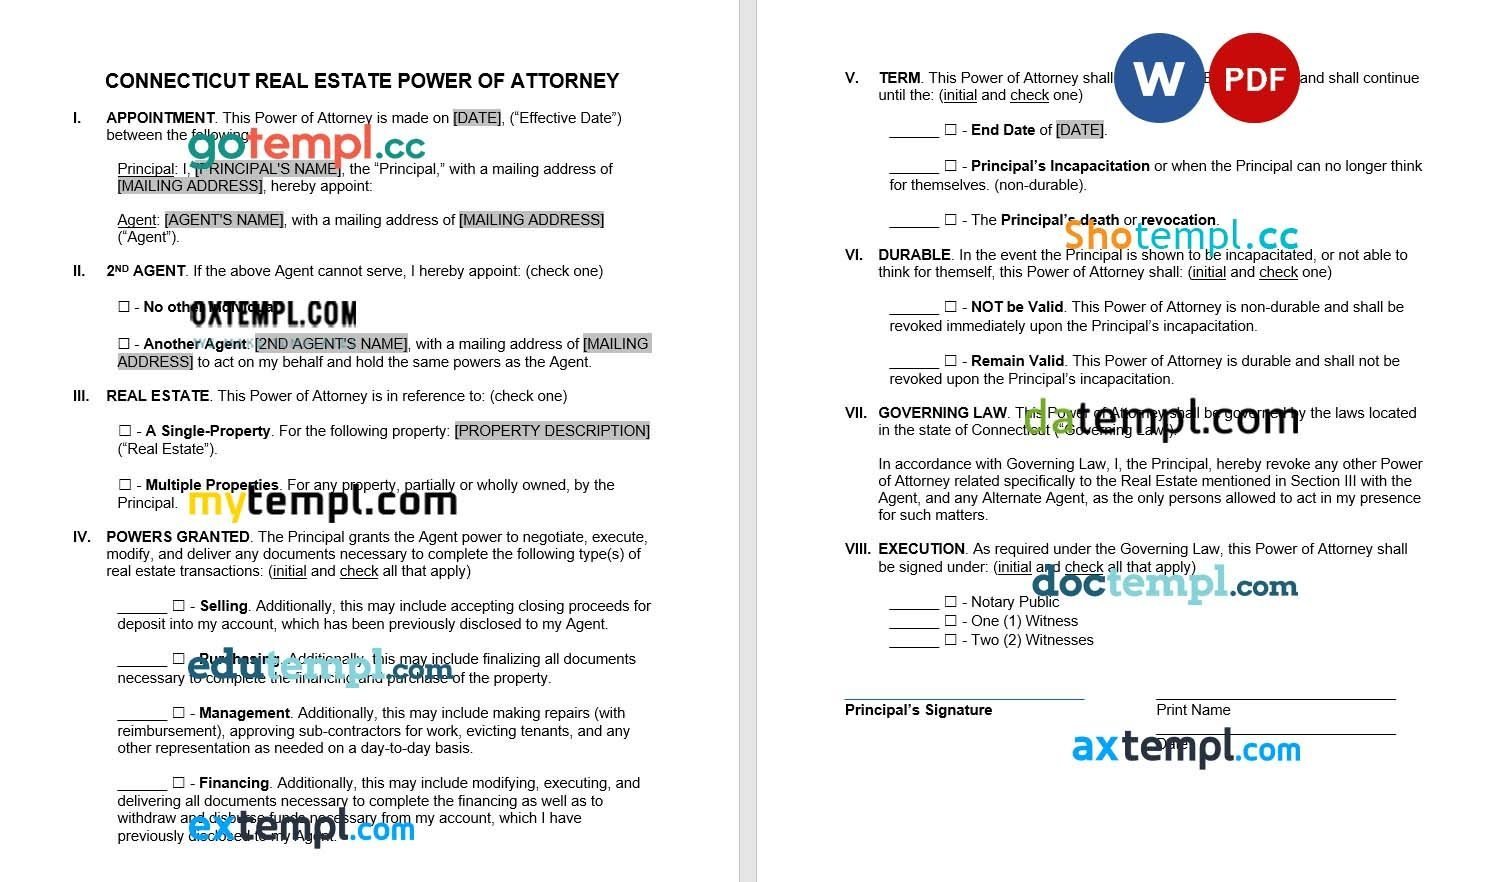 Connecticut Real Estate Power of Attorney Form example, fully editable